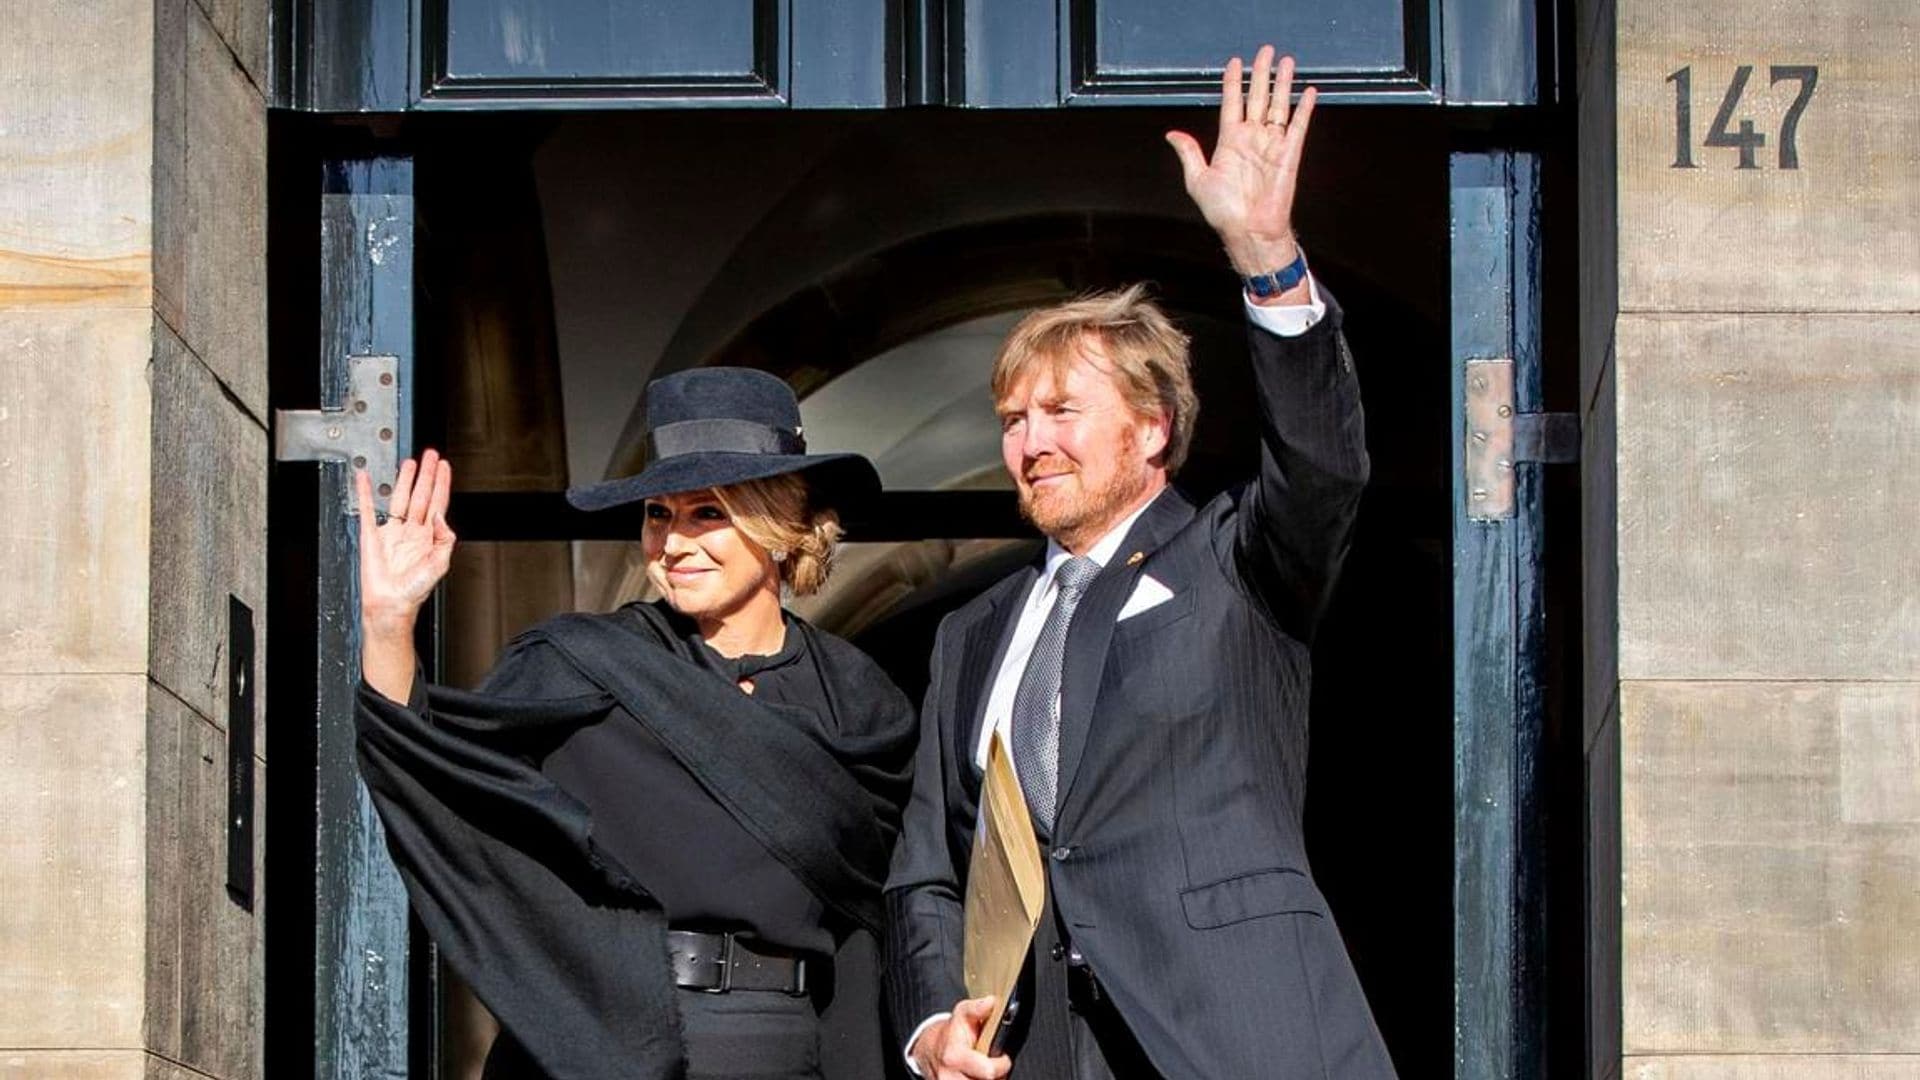 Queen Maxima and King Willem-Alexander